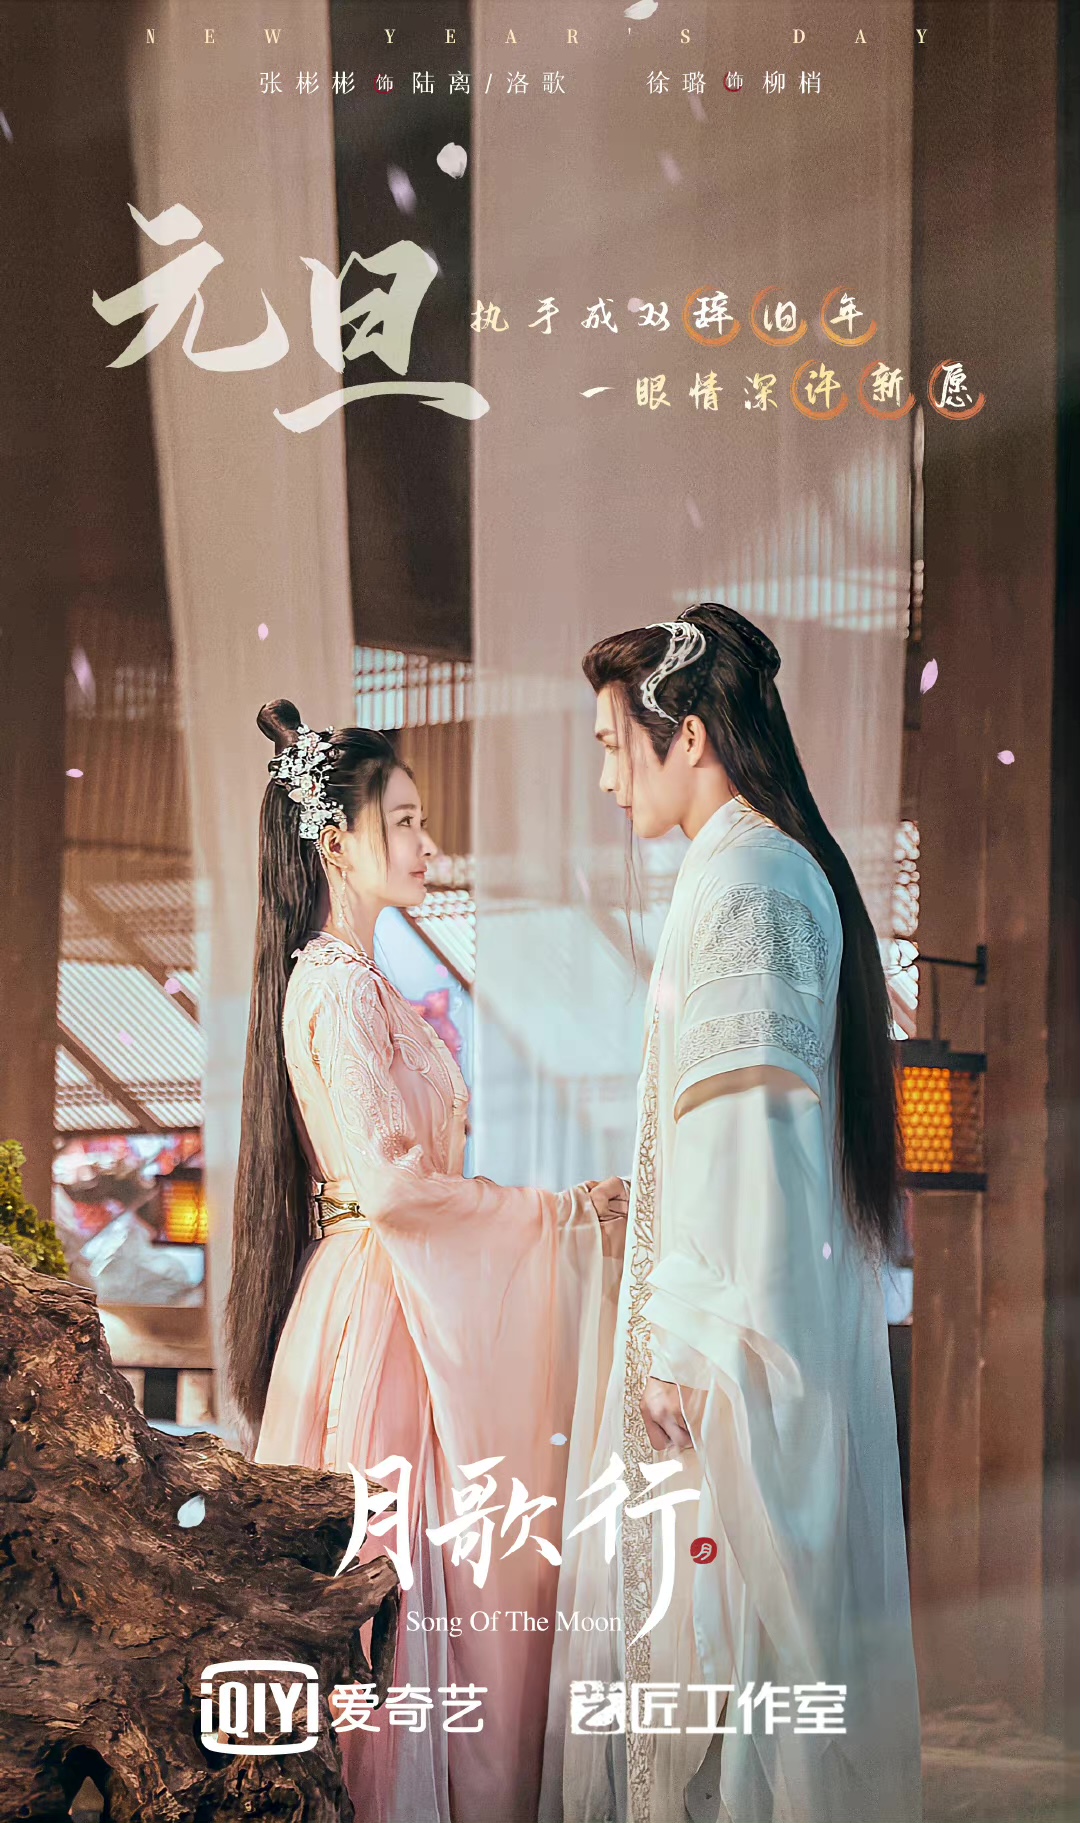 Song Of The Moon WeTV iQIYI Review